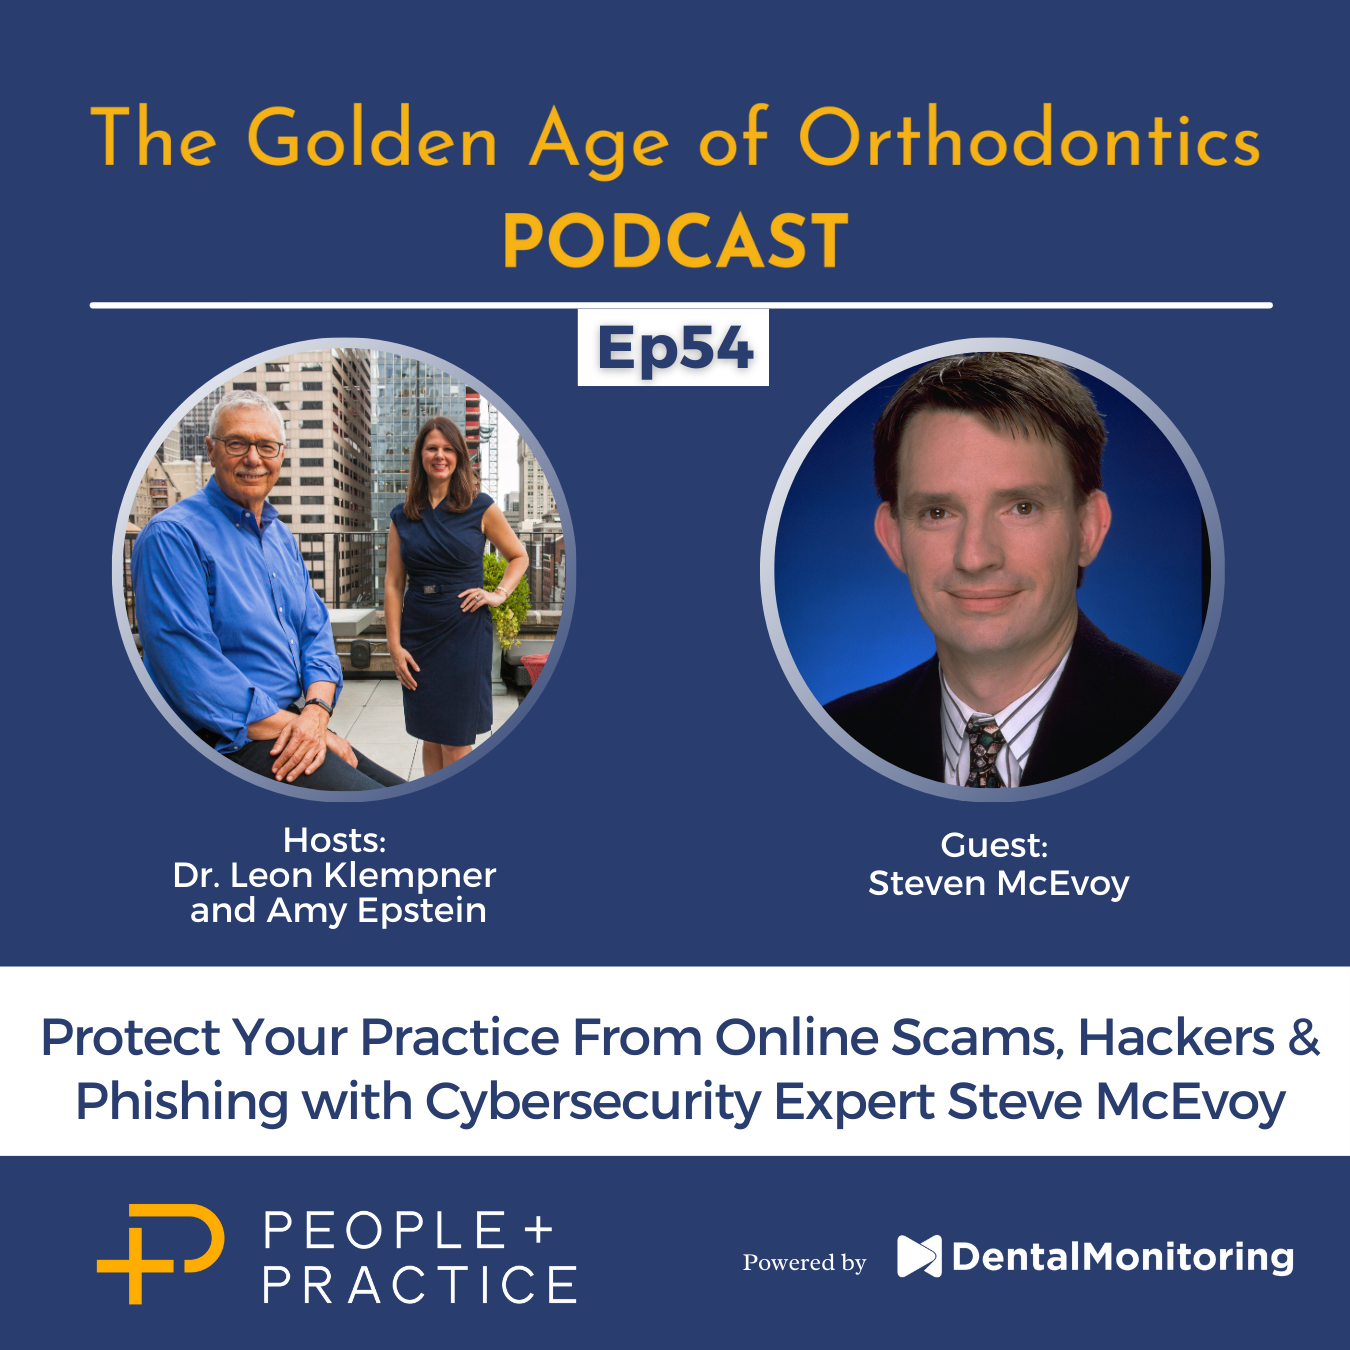 Protect Your Practice From Online Scams, Hackers & Phishing with Cybersecurity Expert Steve McEvoy